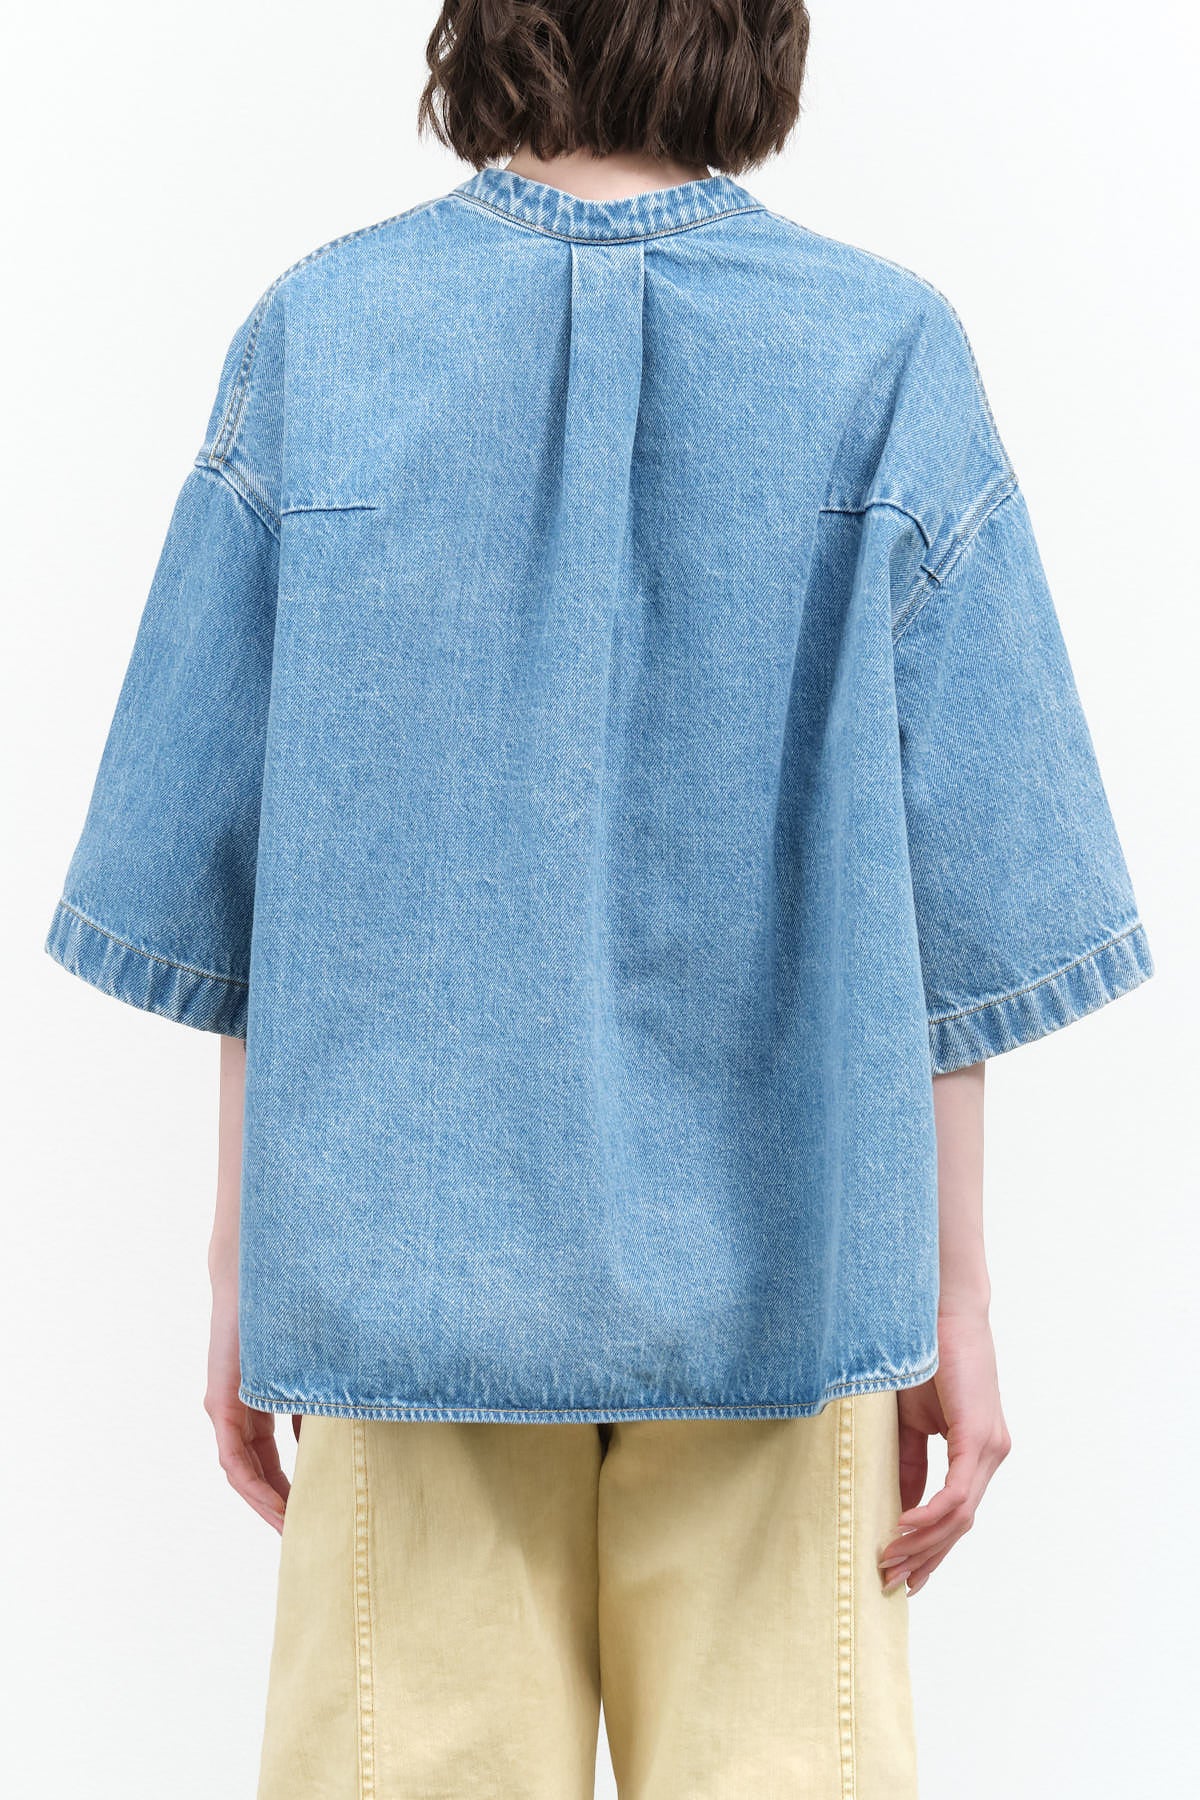 Pleated Back Denim Shirt by Christian Wijnants